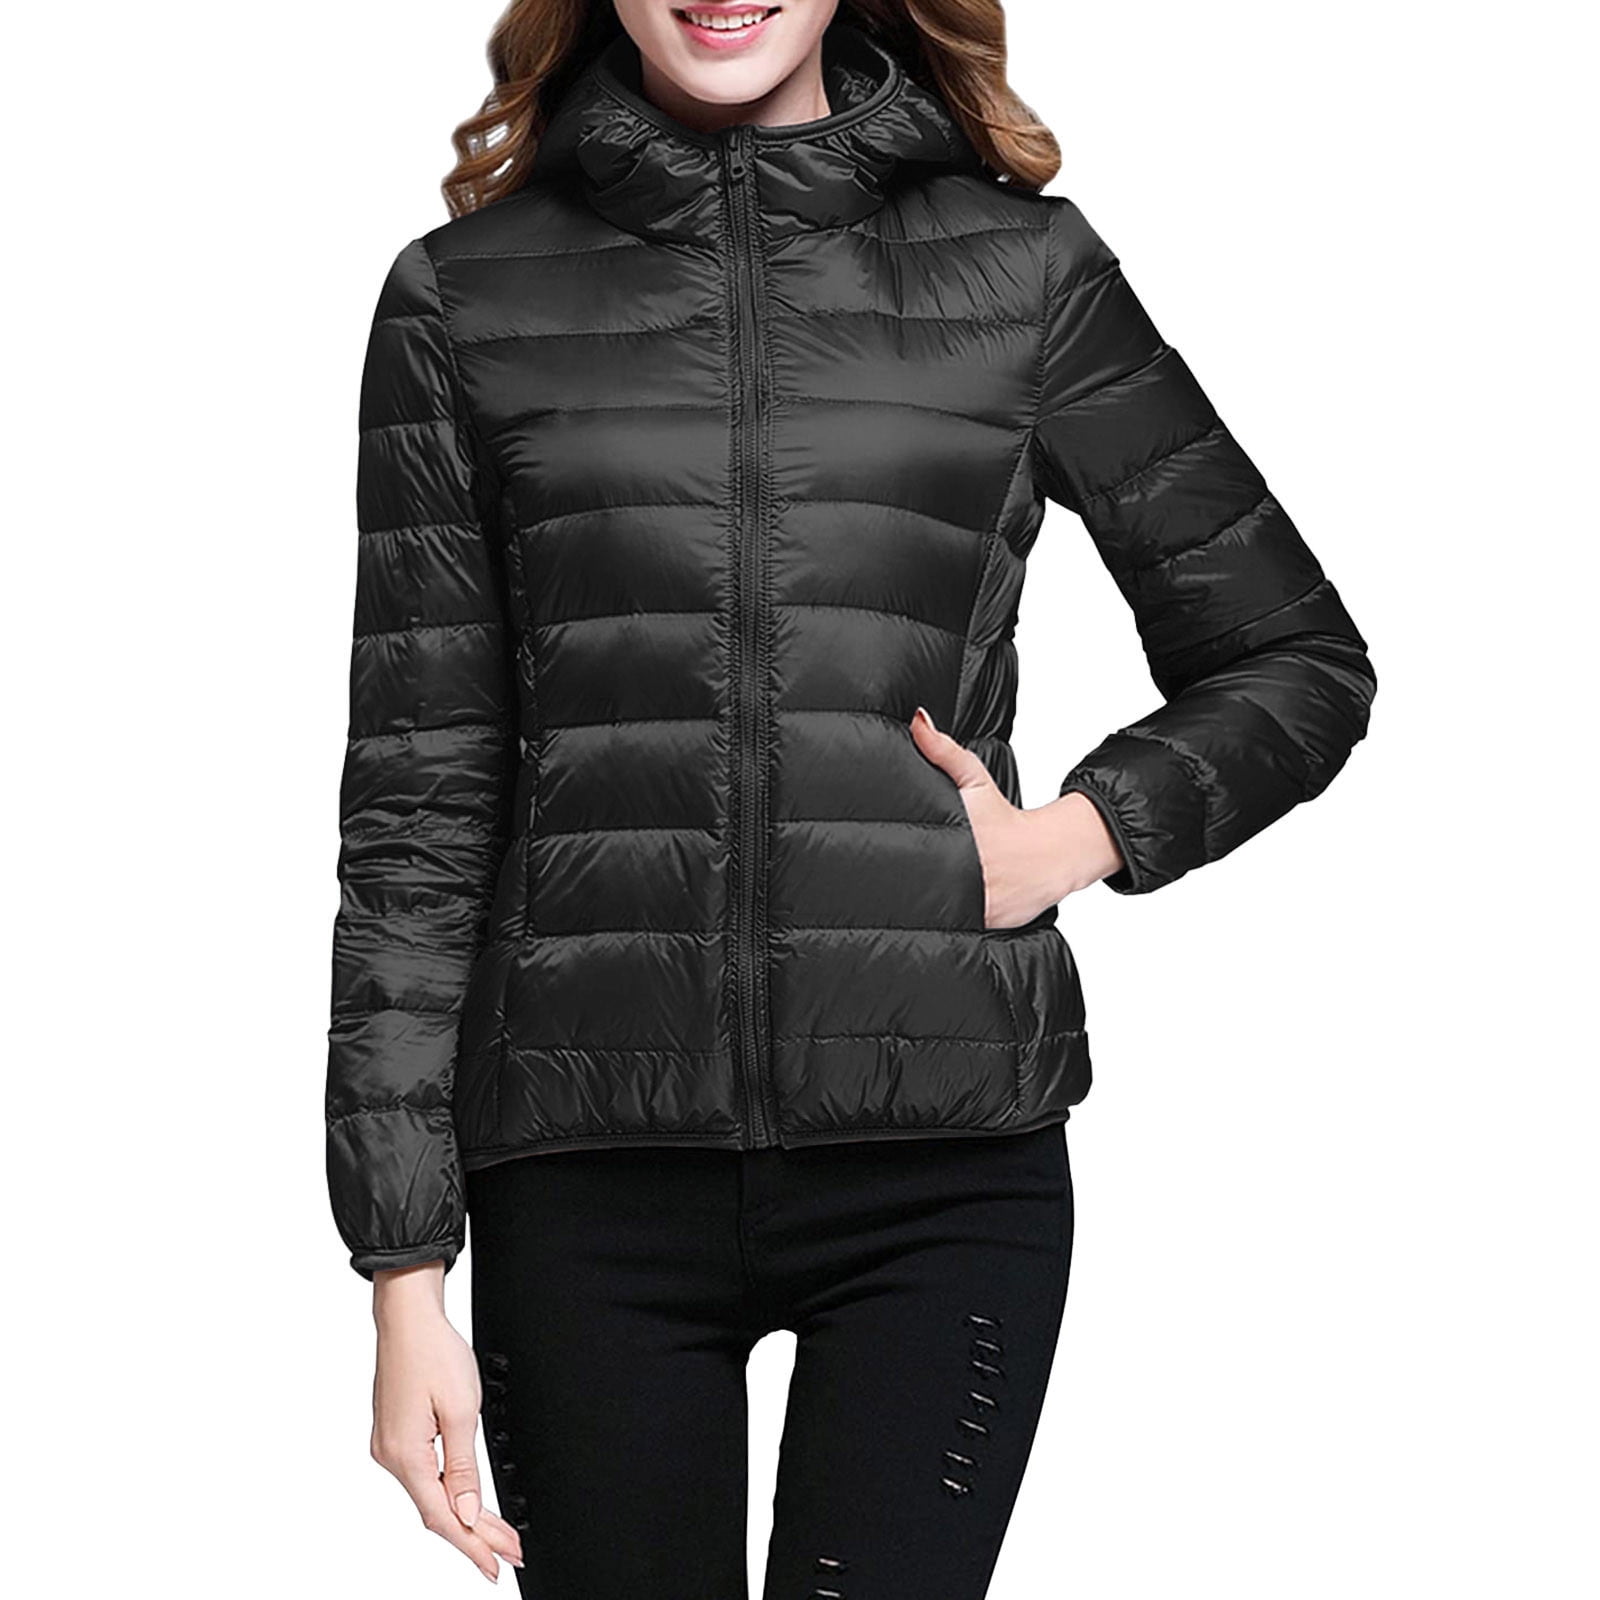 Lightweight warm jacket women’s: Stay Cozy and Chic